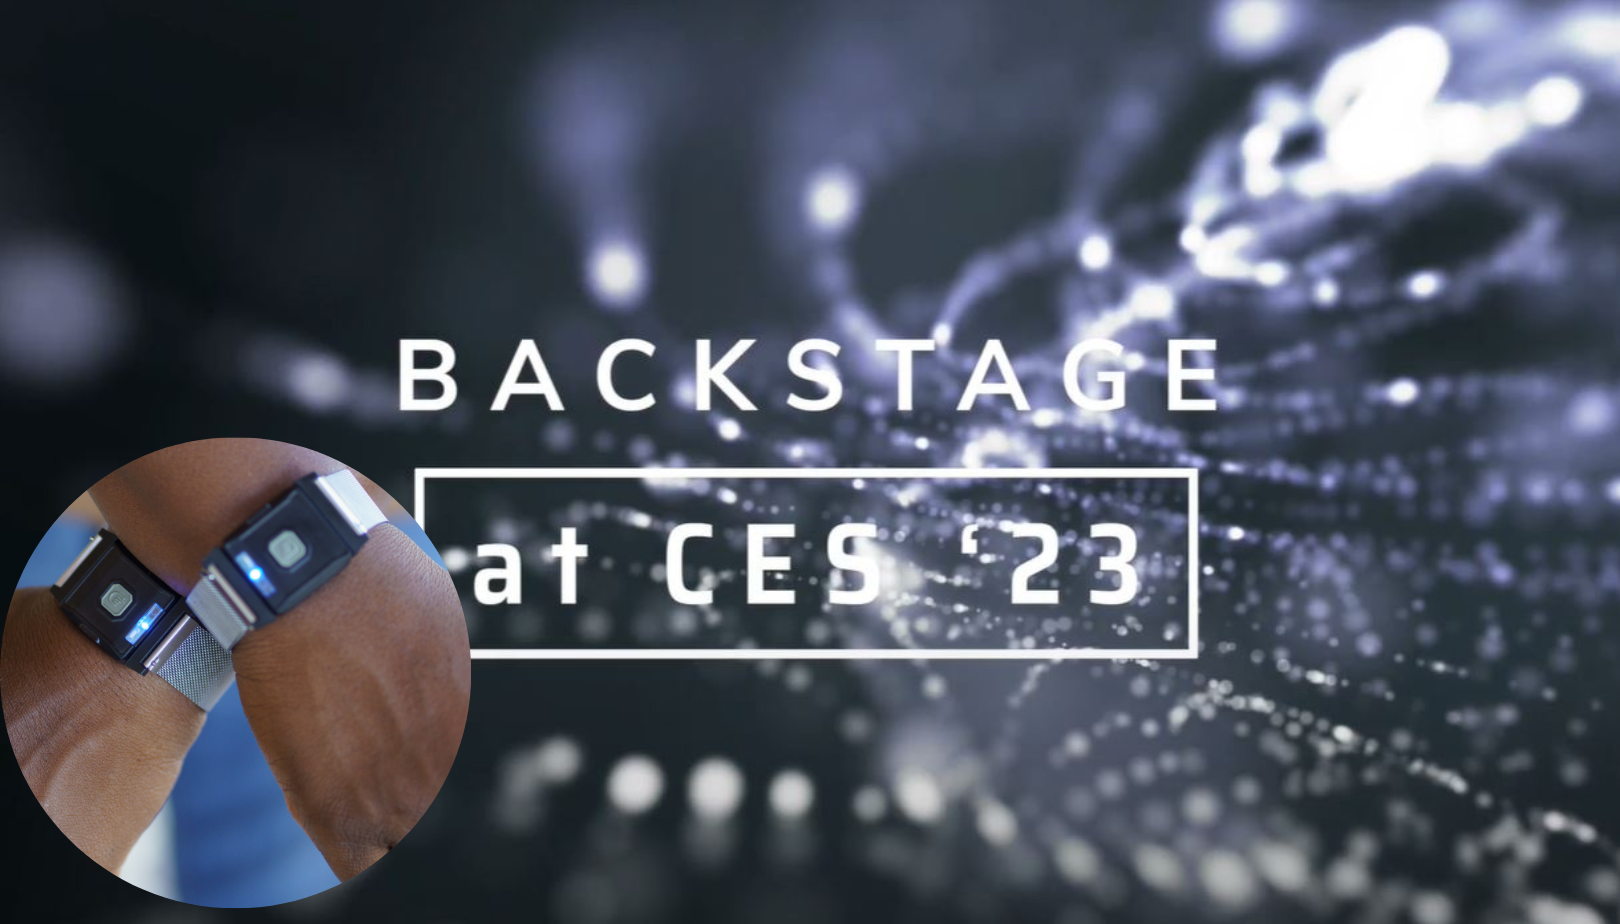 Bloomberg Television: Backstage at CES '23 with TouchPoint Solution